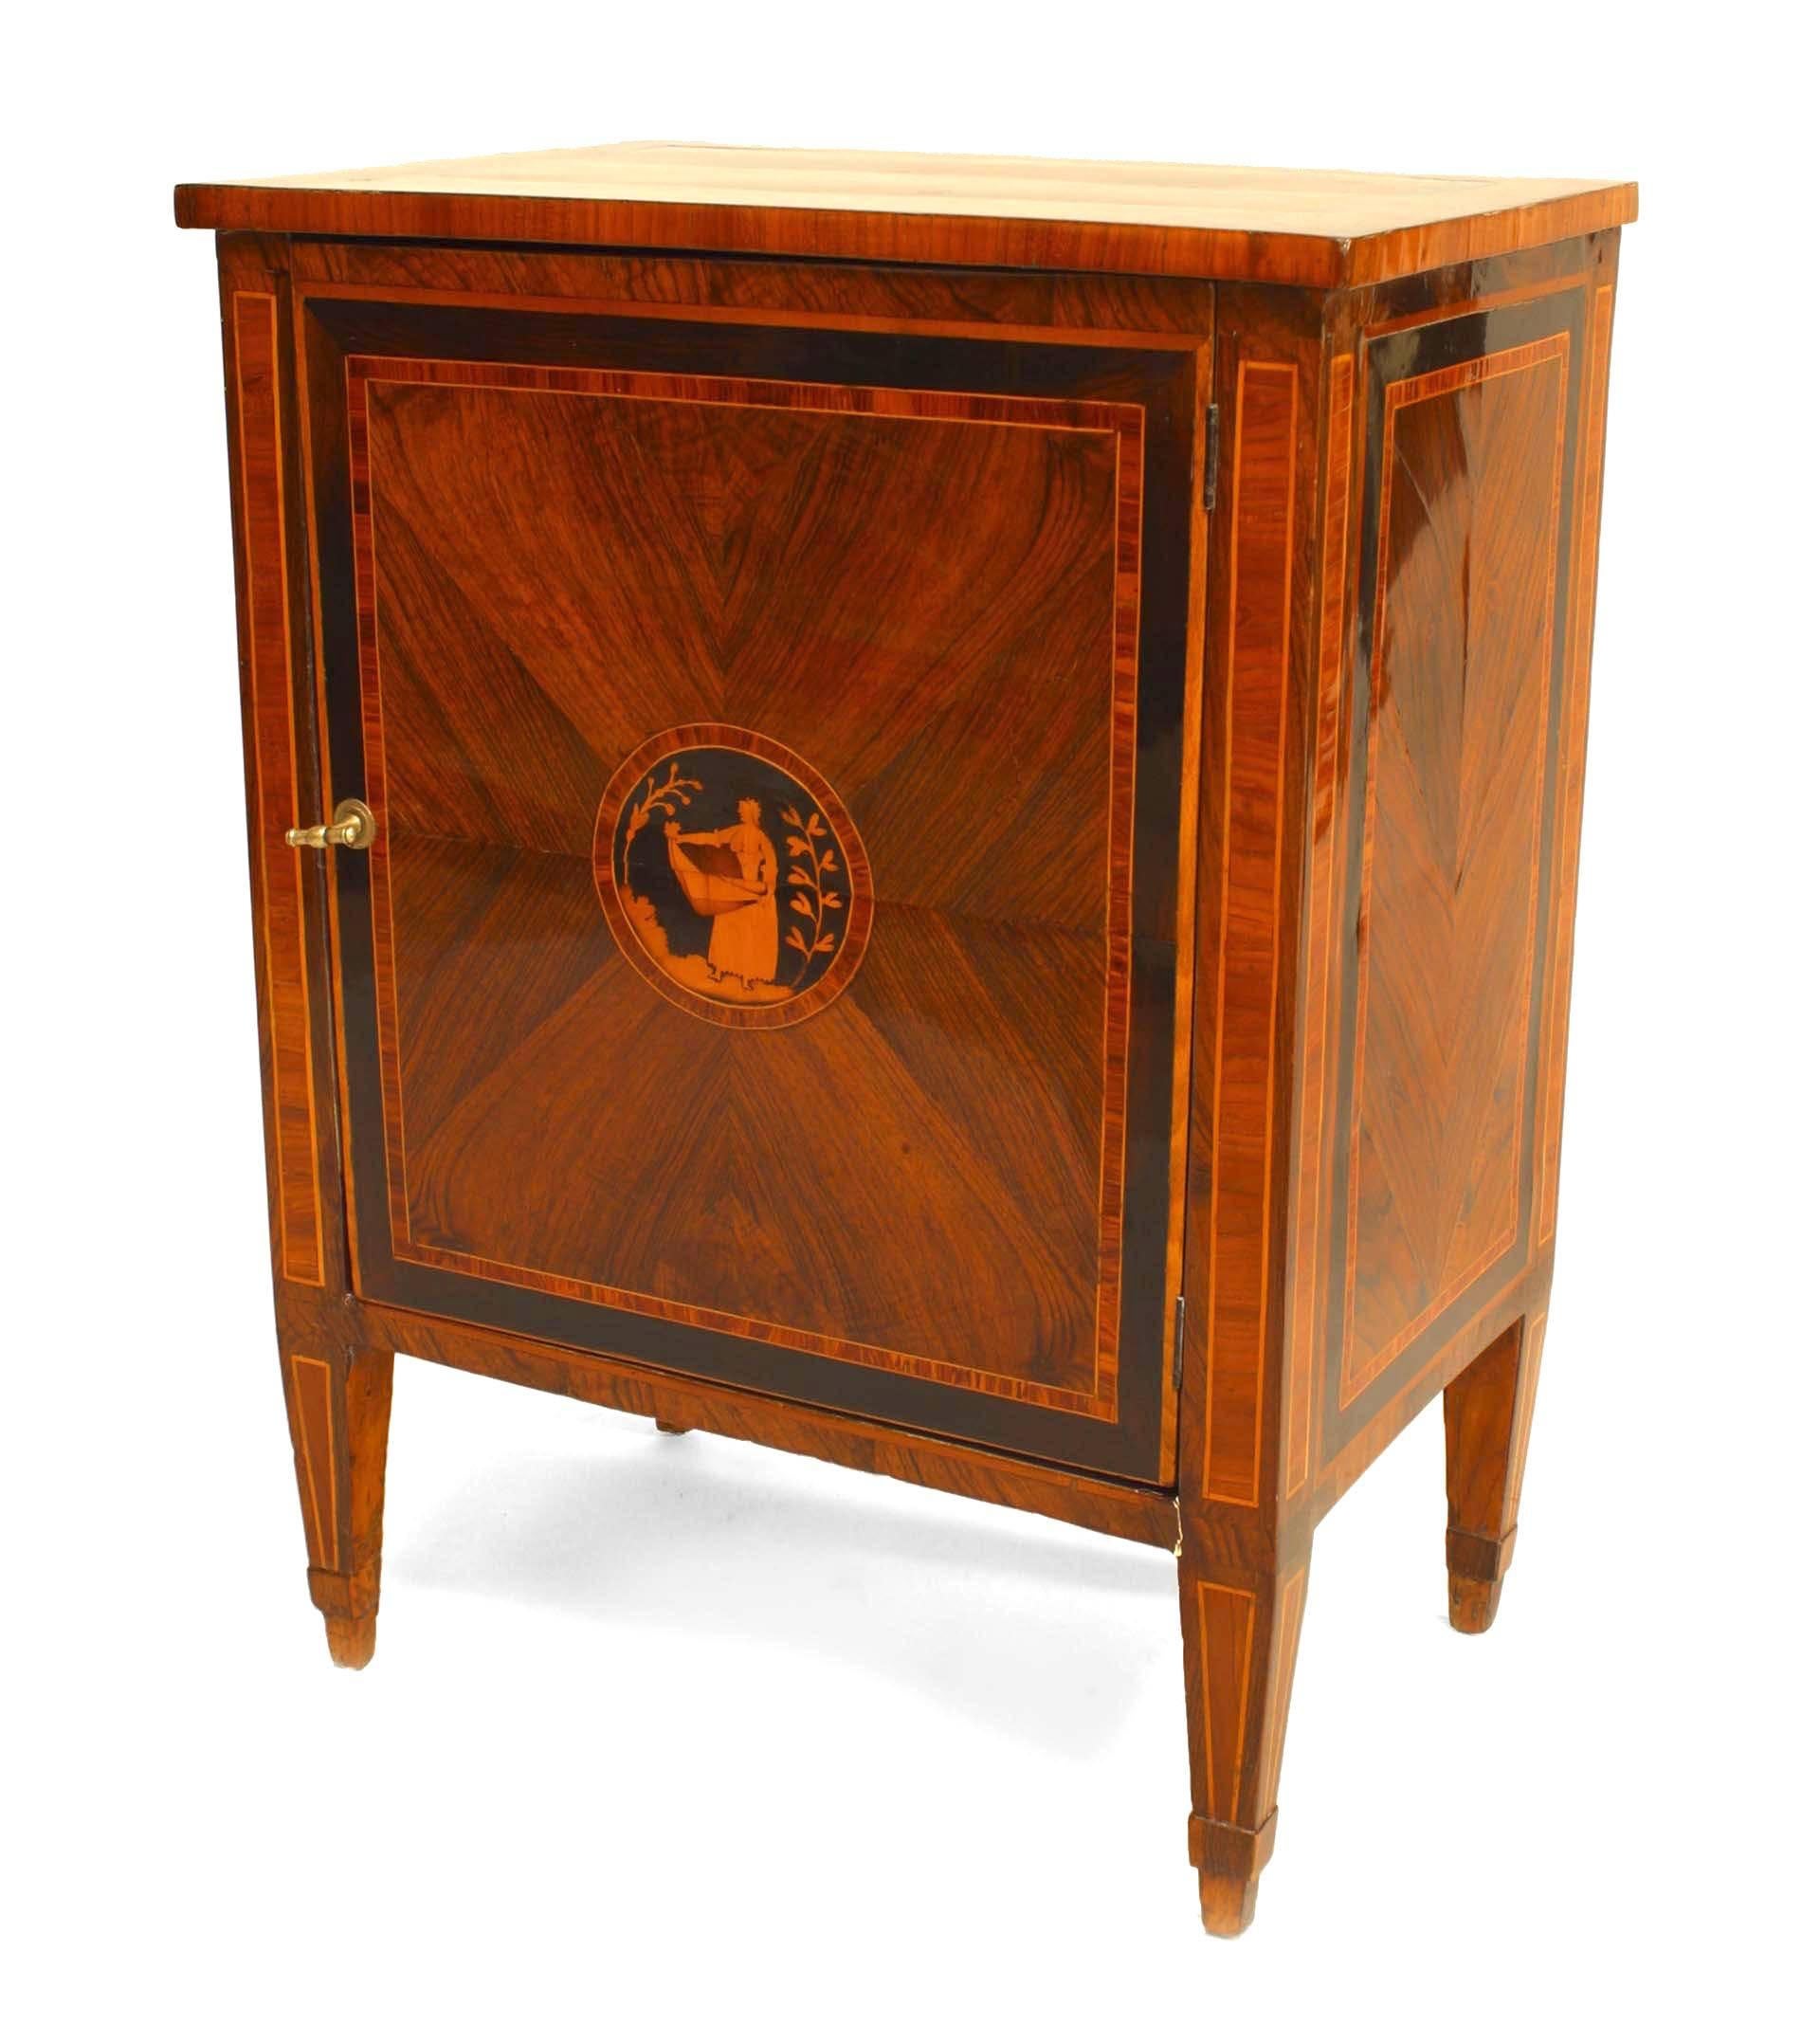 Italian Neo-classic (18/19th Century) kingwood veneer small commode with a single drawer and inlaid trim and medallion on door panel.
